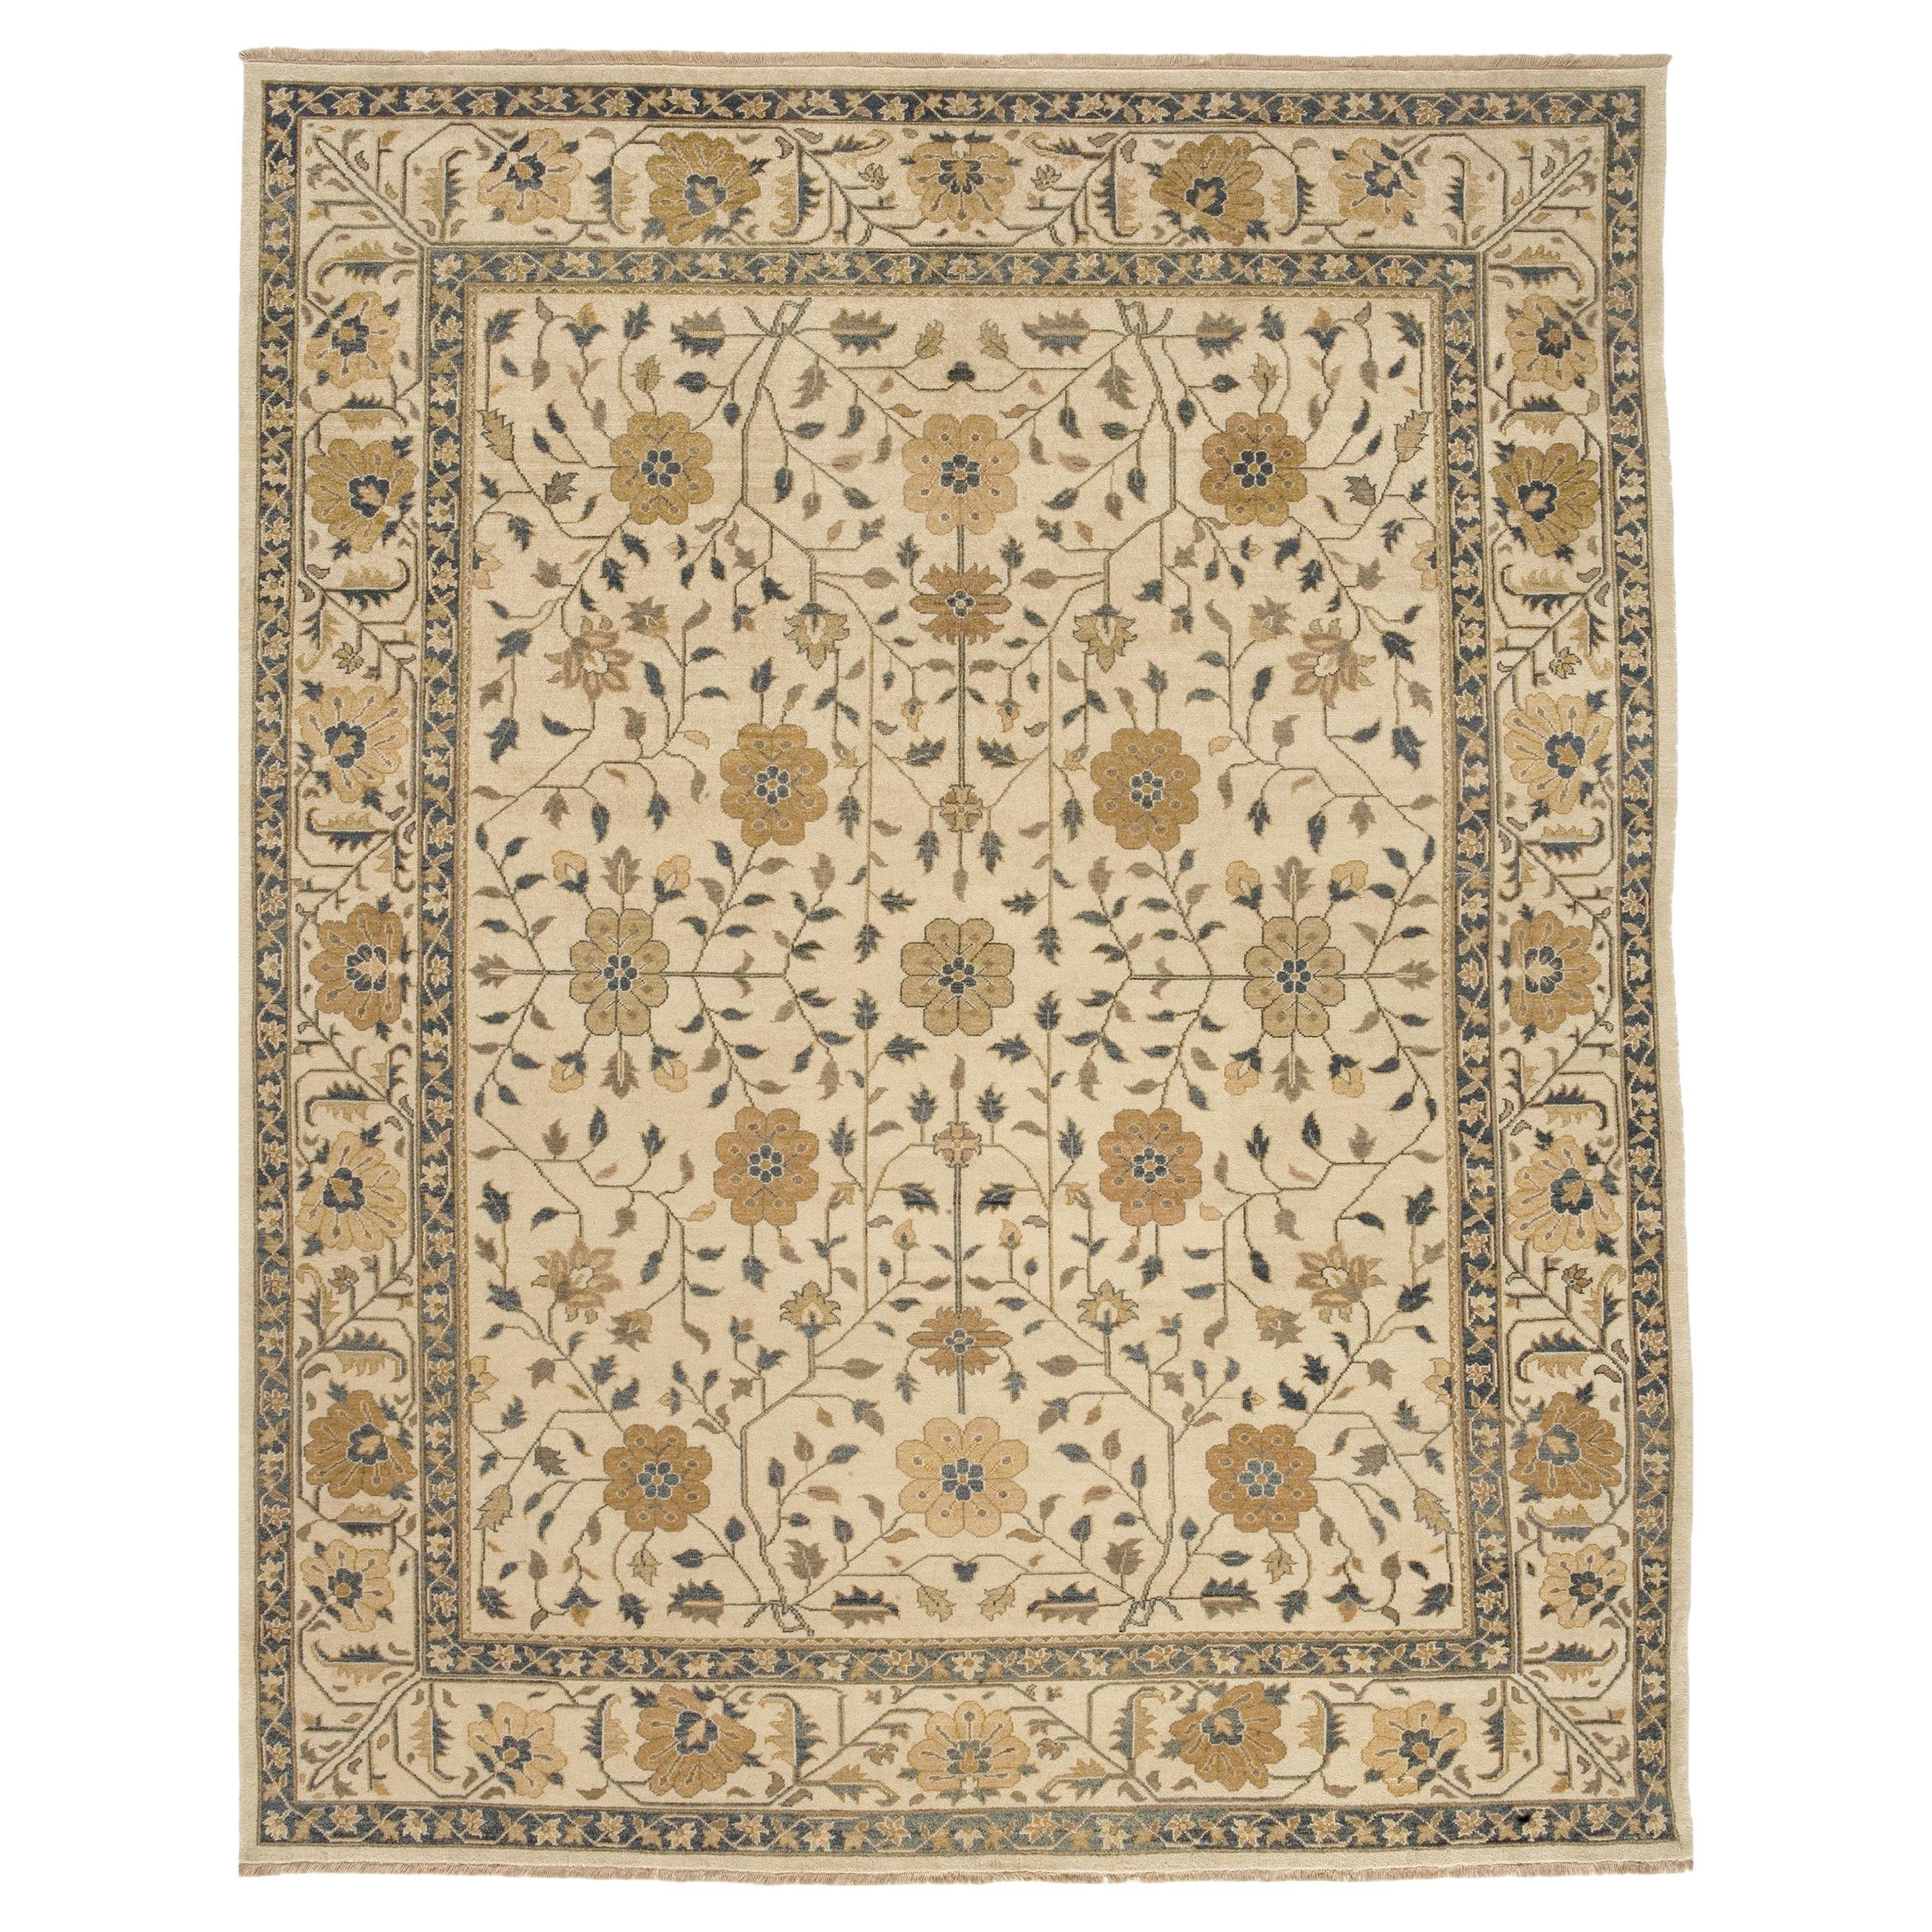 Luxury Traditional Hand-Knotted Jinan Cream 16x28 Rug